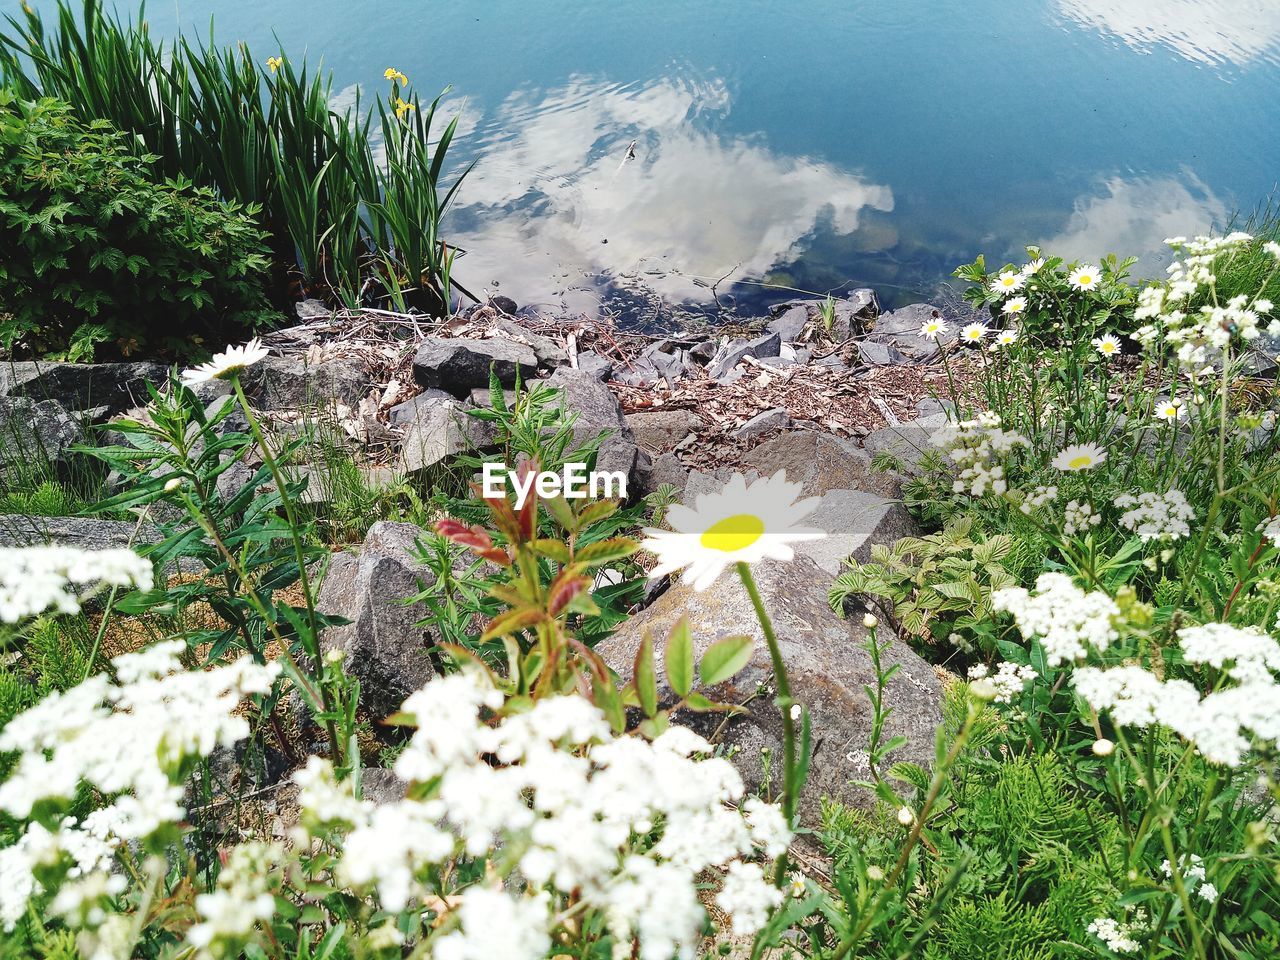 HIGH ANGLE VIEW OF FLOWERING PLANT BY WATER